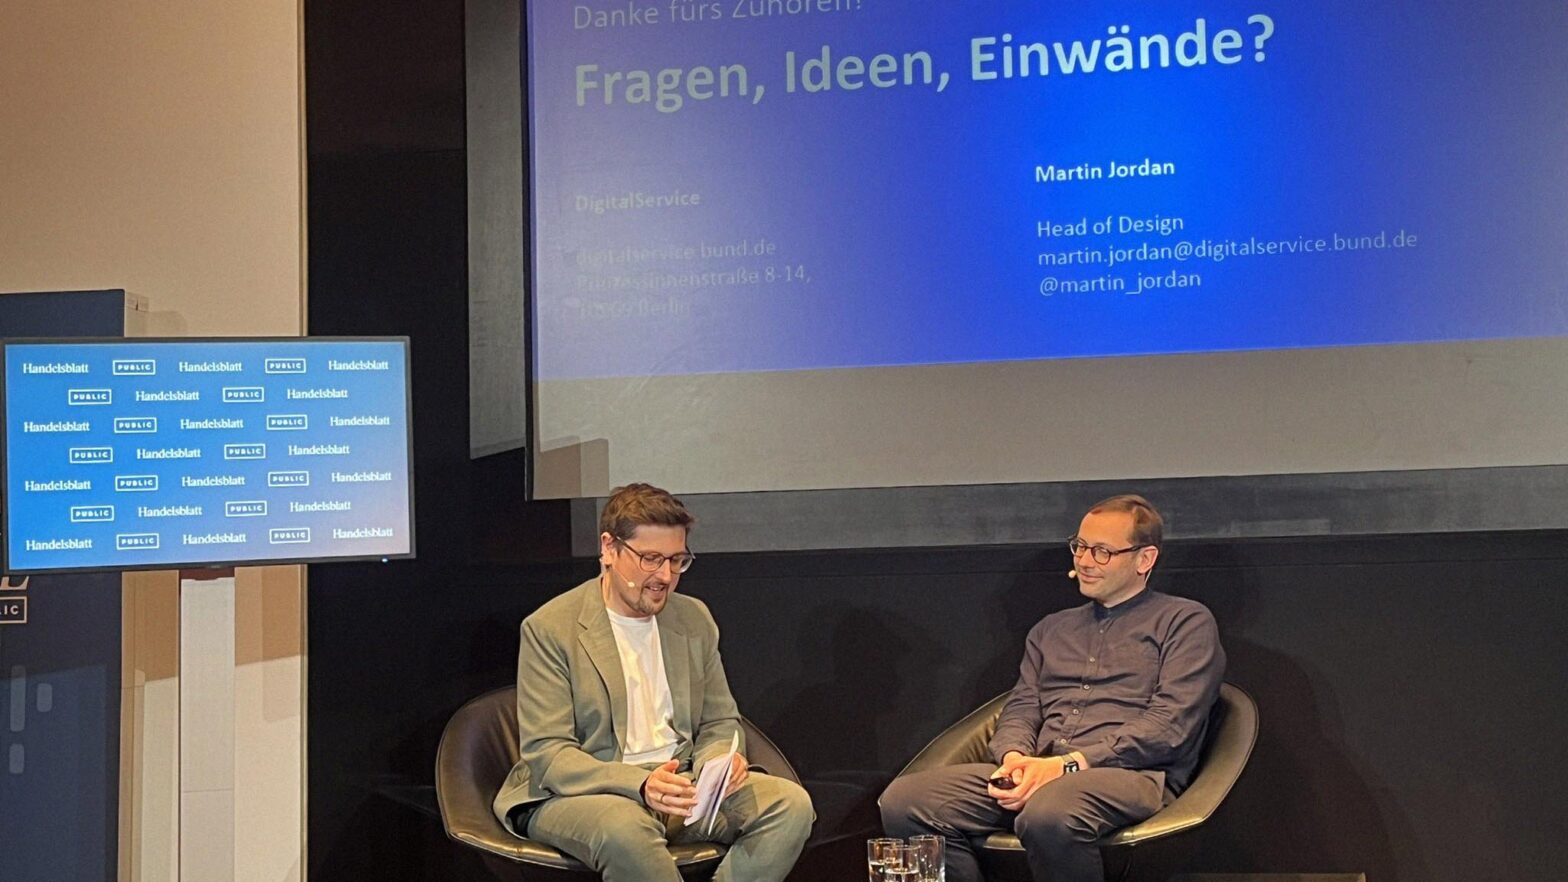 Two young-ish white men with glasses on stage talking to each other with a presentation slide above them saying ‘Questions, ideas, concerns?’ in German